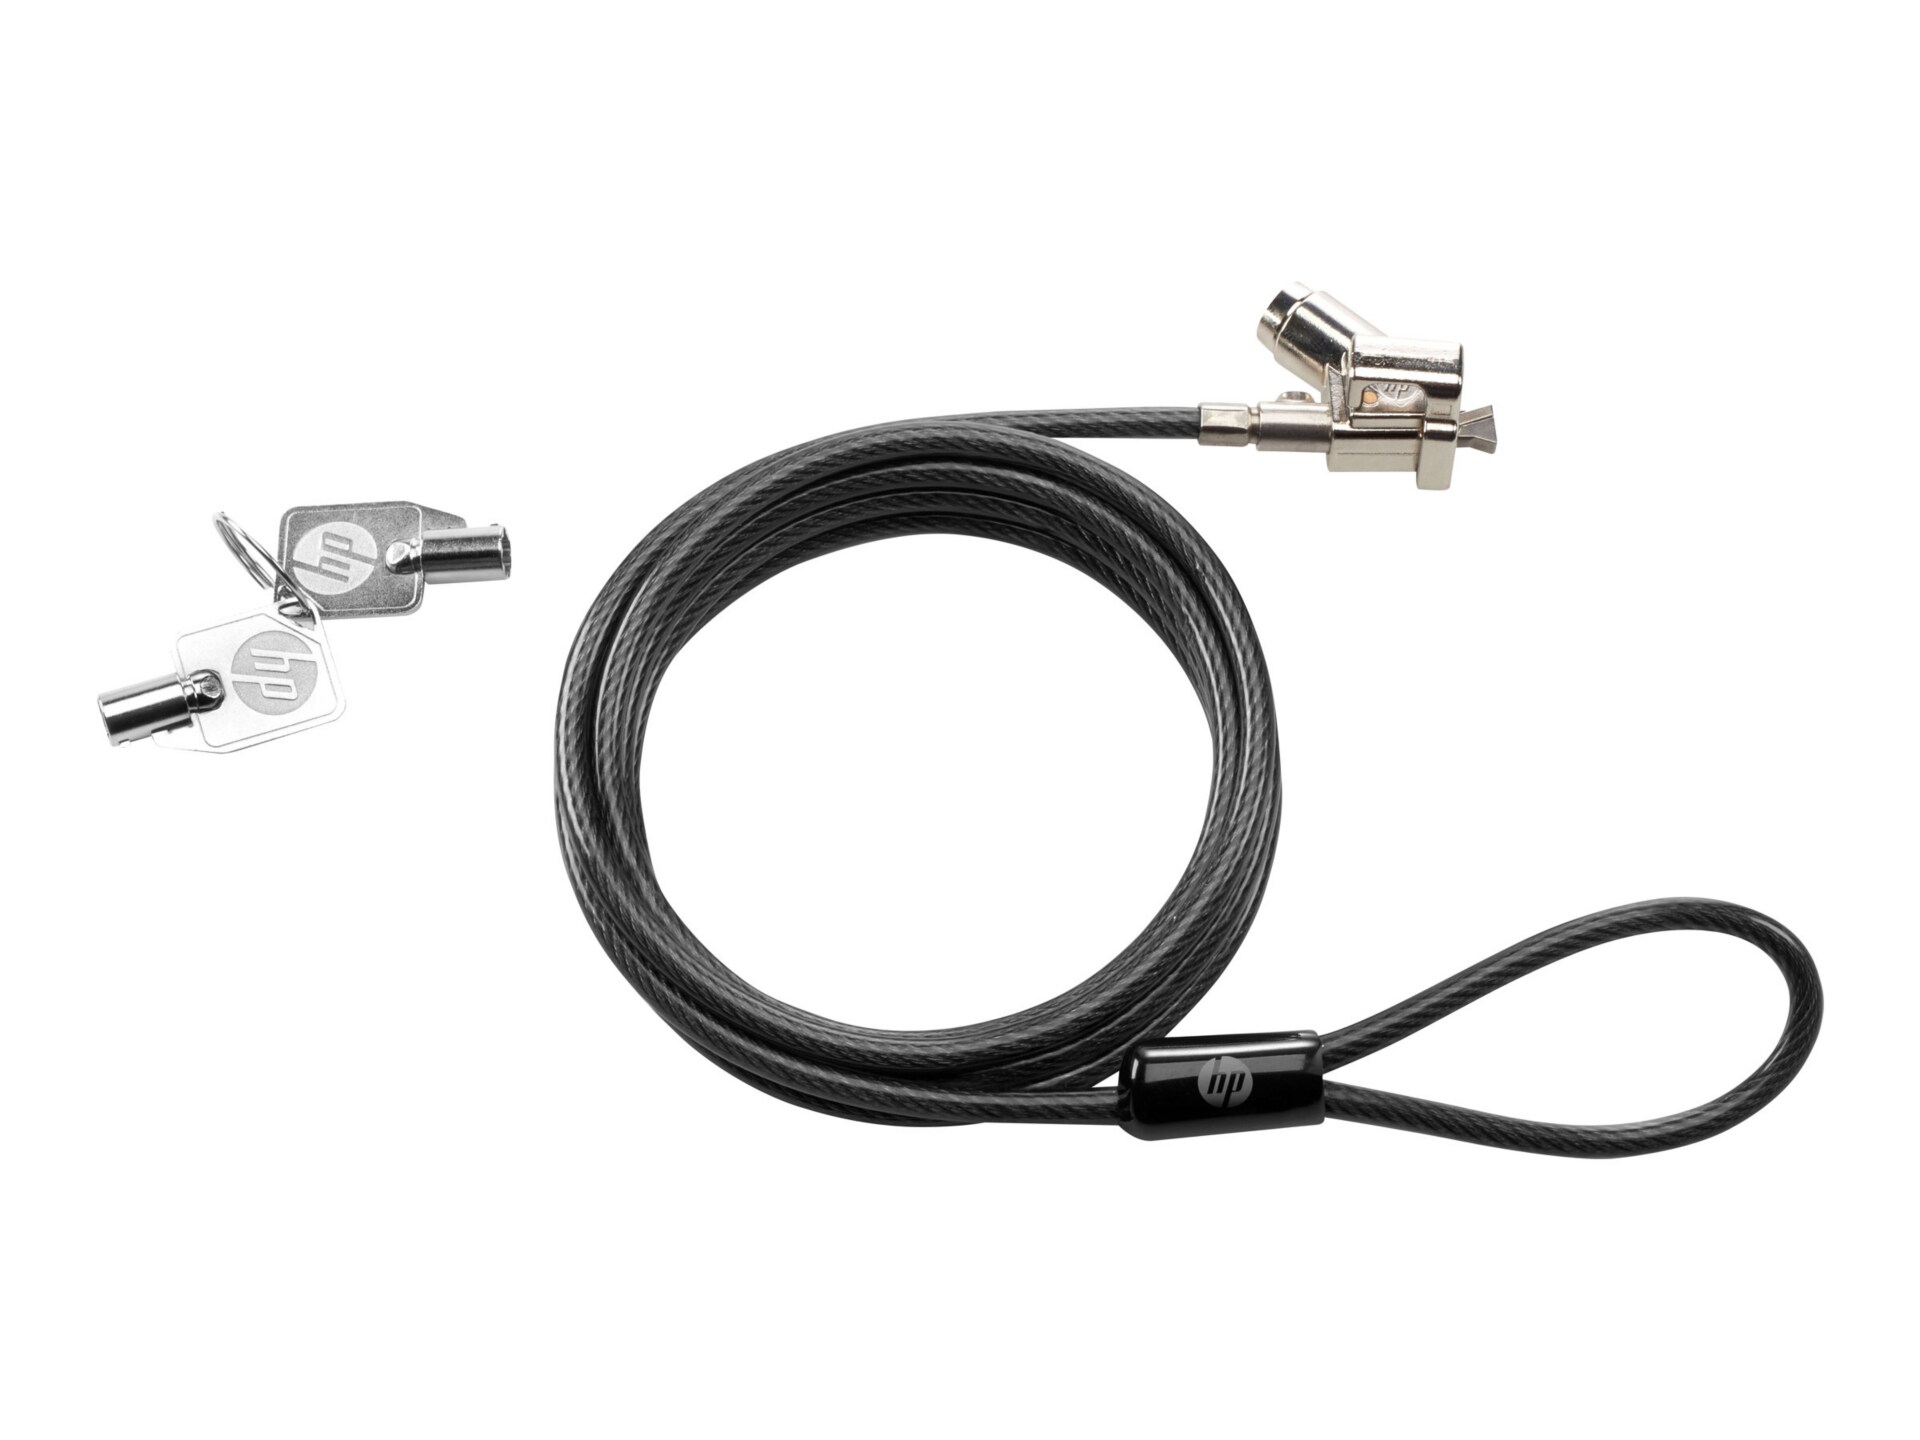 HP Tablet Master Cable Lock - security cable lock